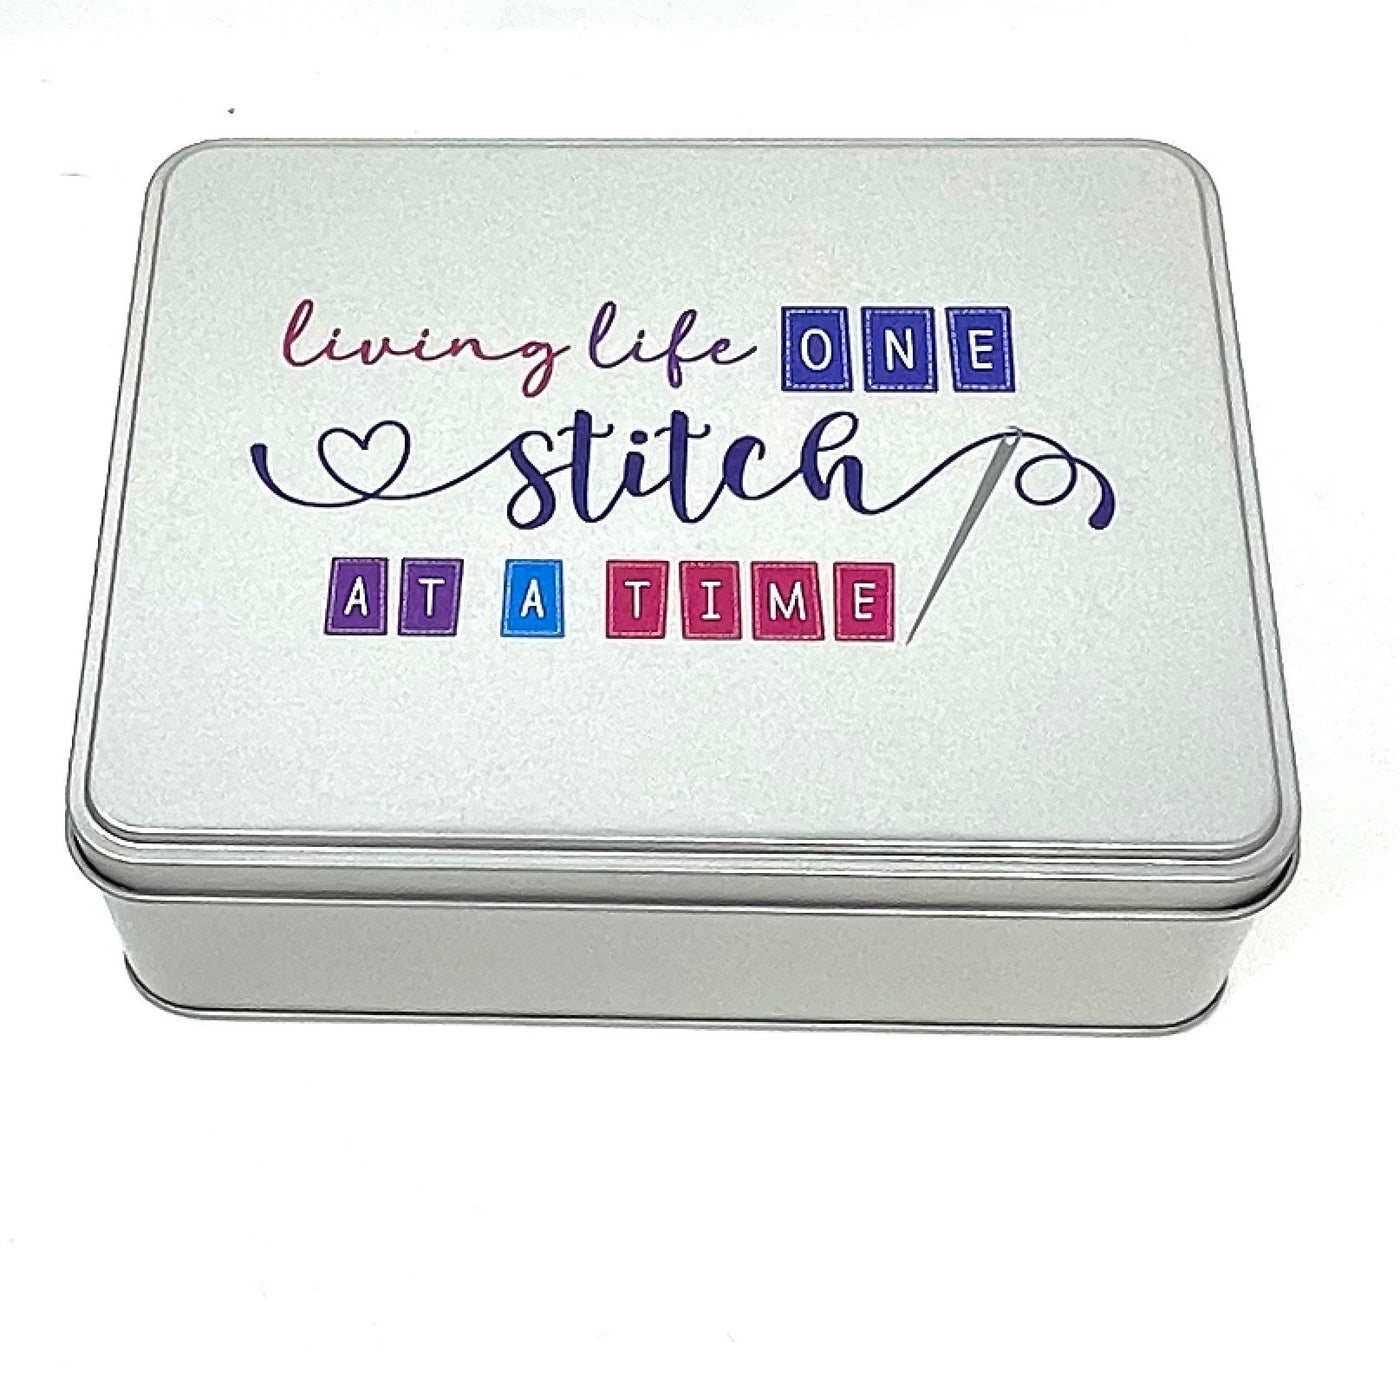 WIP bobbin storage tin 'Living Life one stitch at a time' with foam insert to hold 30 bobbins for cross stitch / embroidery projects